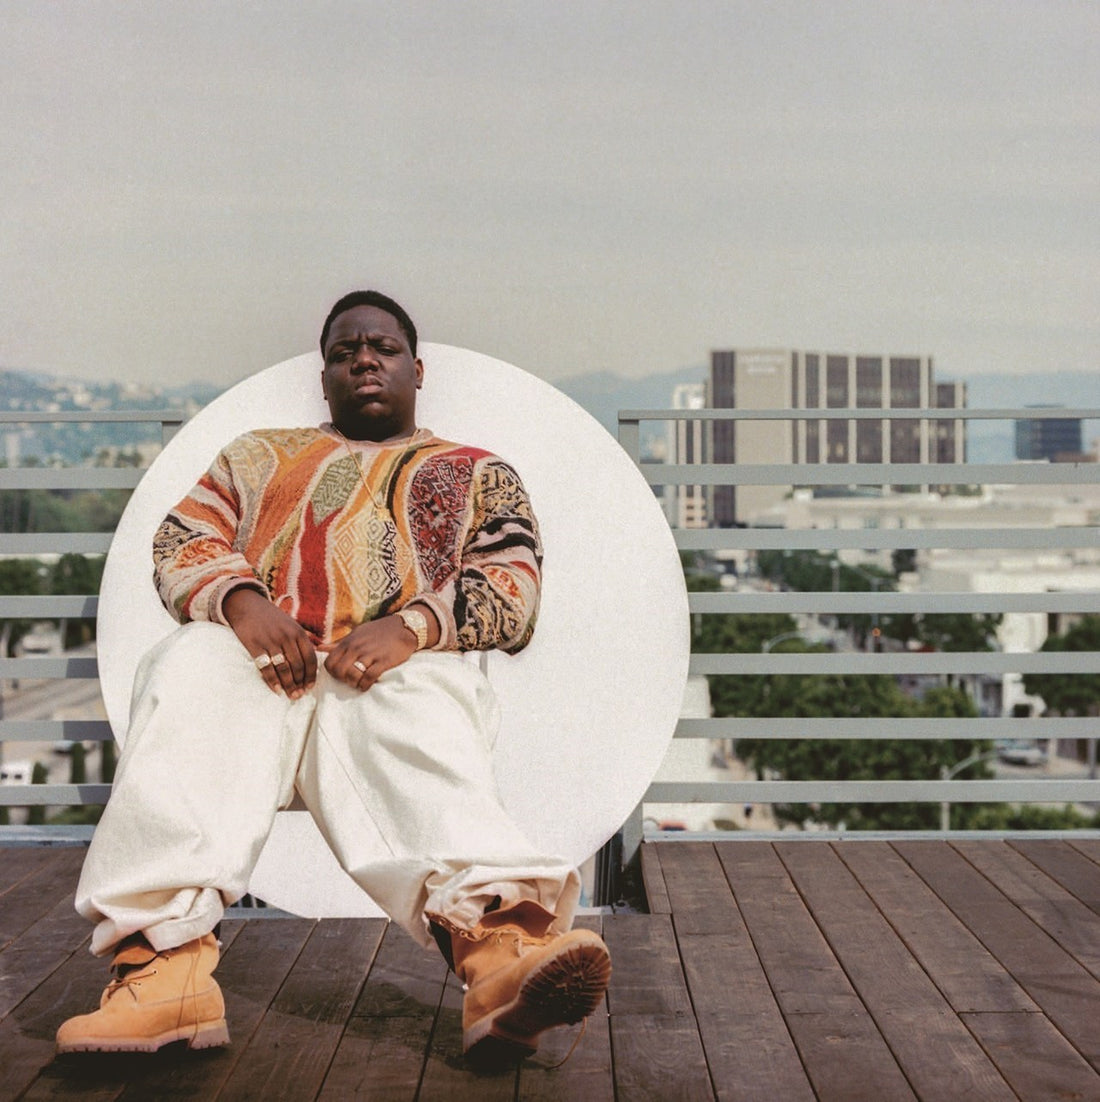 A look back at The Notorious style of B.I.G